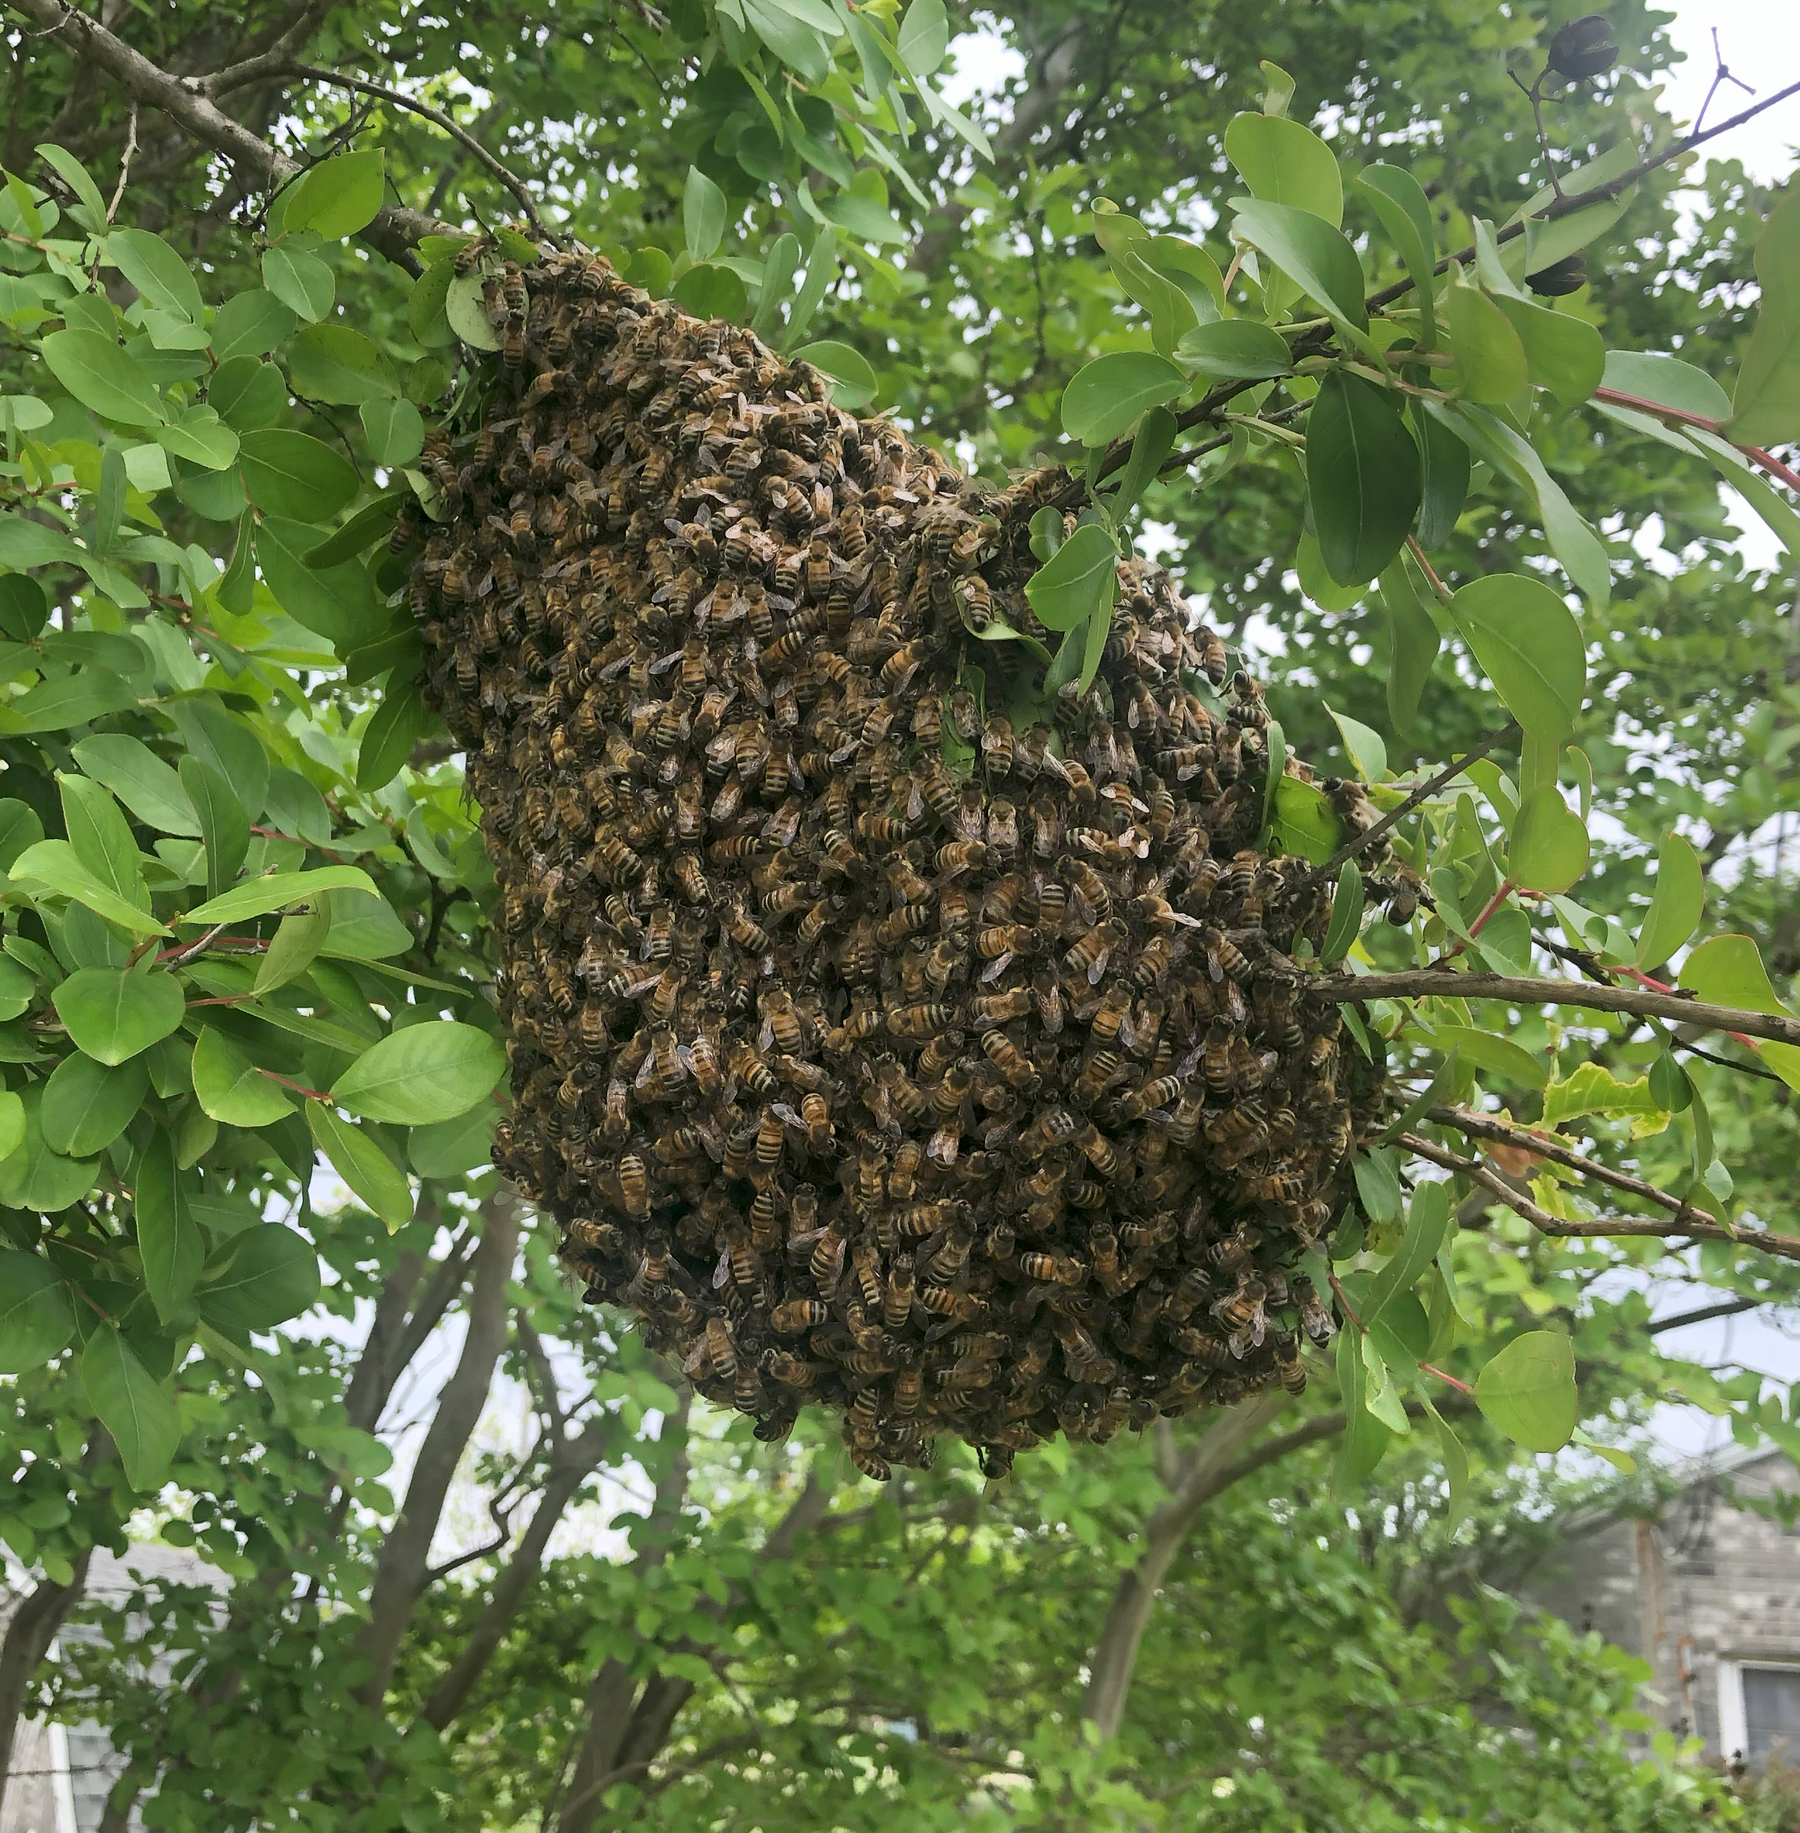 Spring into Action: The Art of Capturing a Honey Bee Swarm